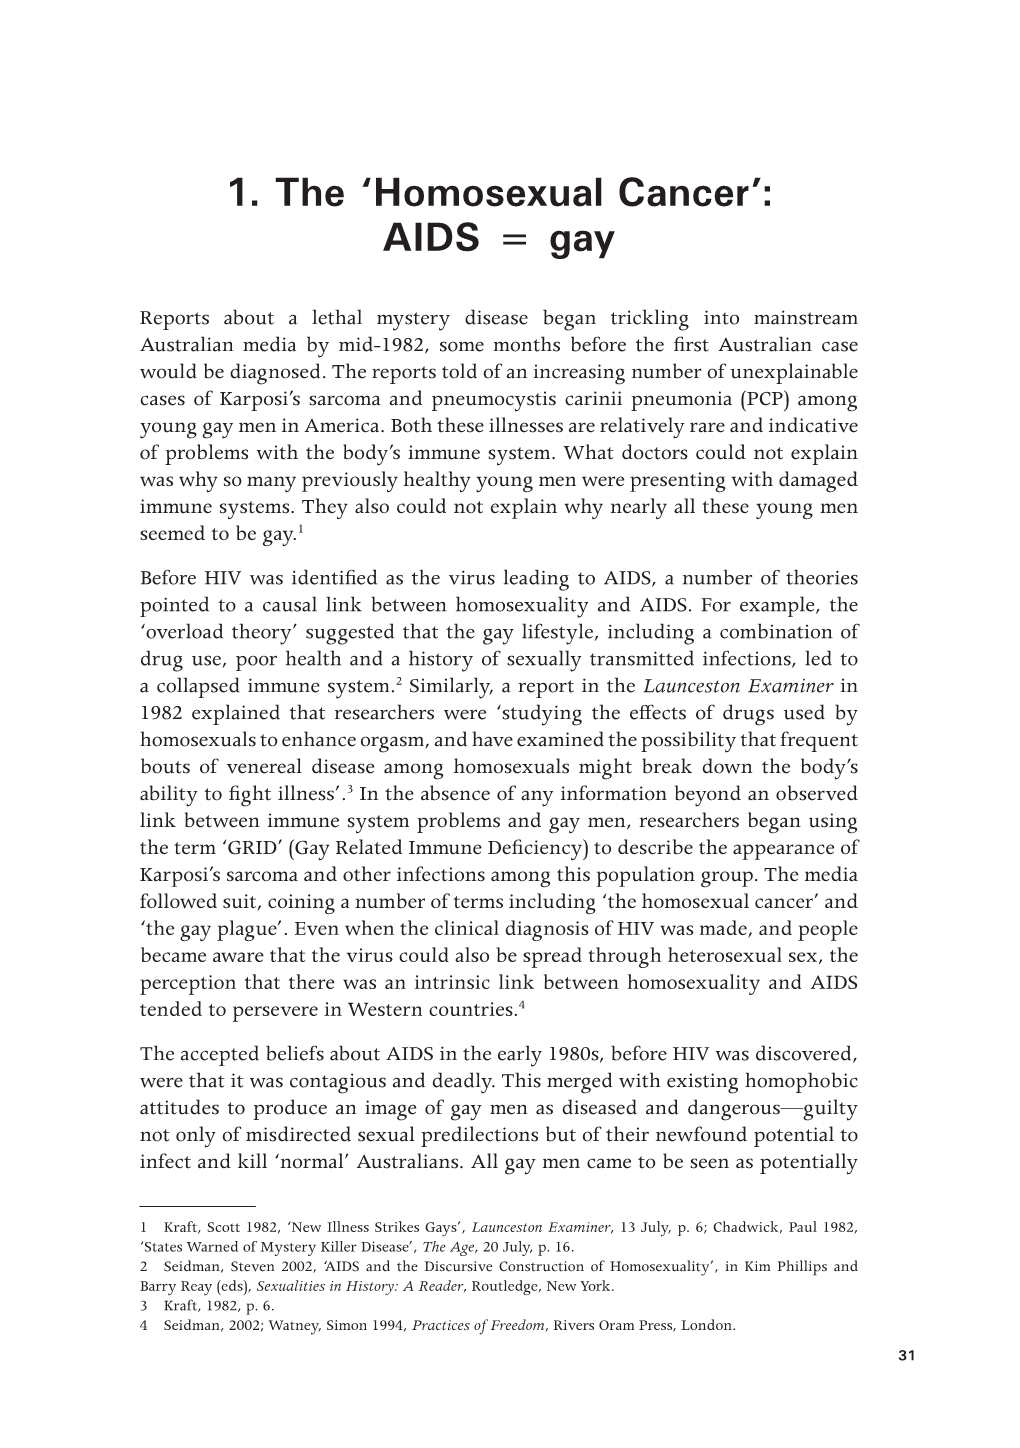 Movement, Knowledge, Emotion: Gay Activism and HIV/AIDS in Australia